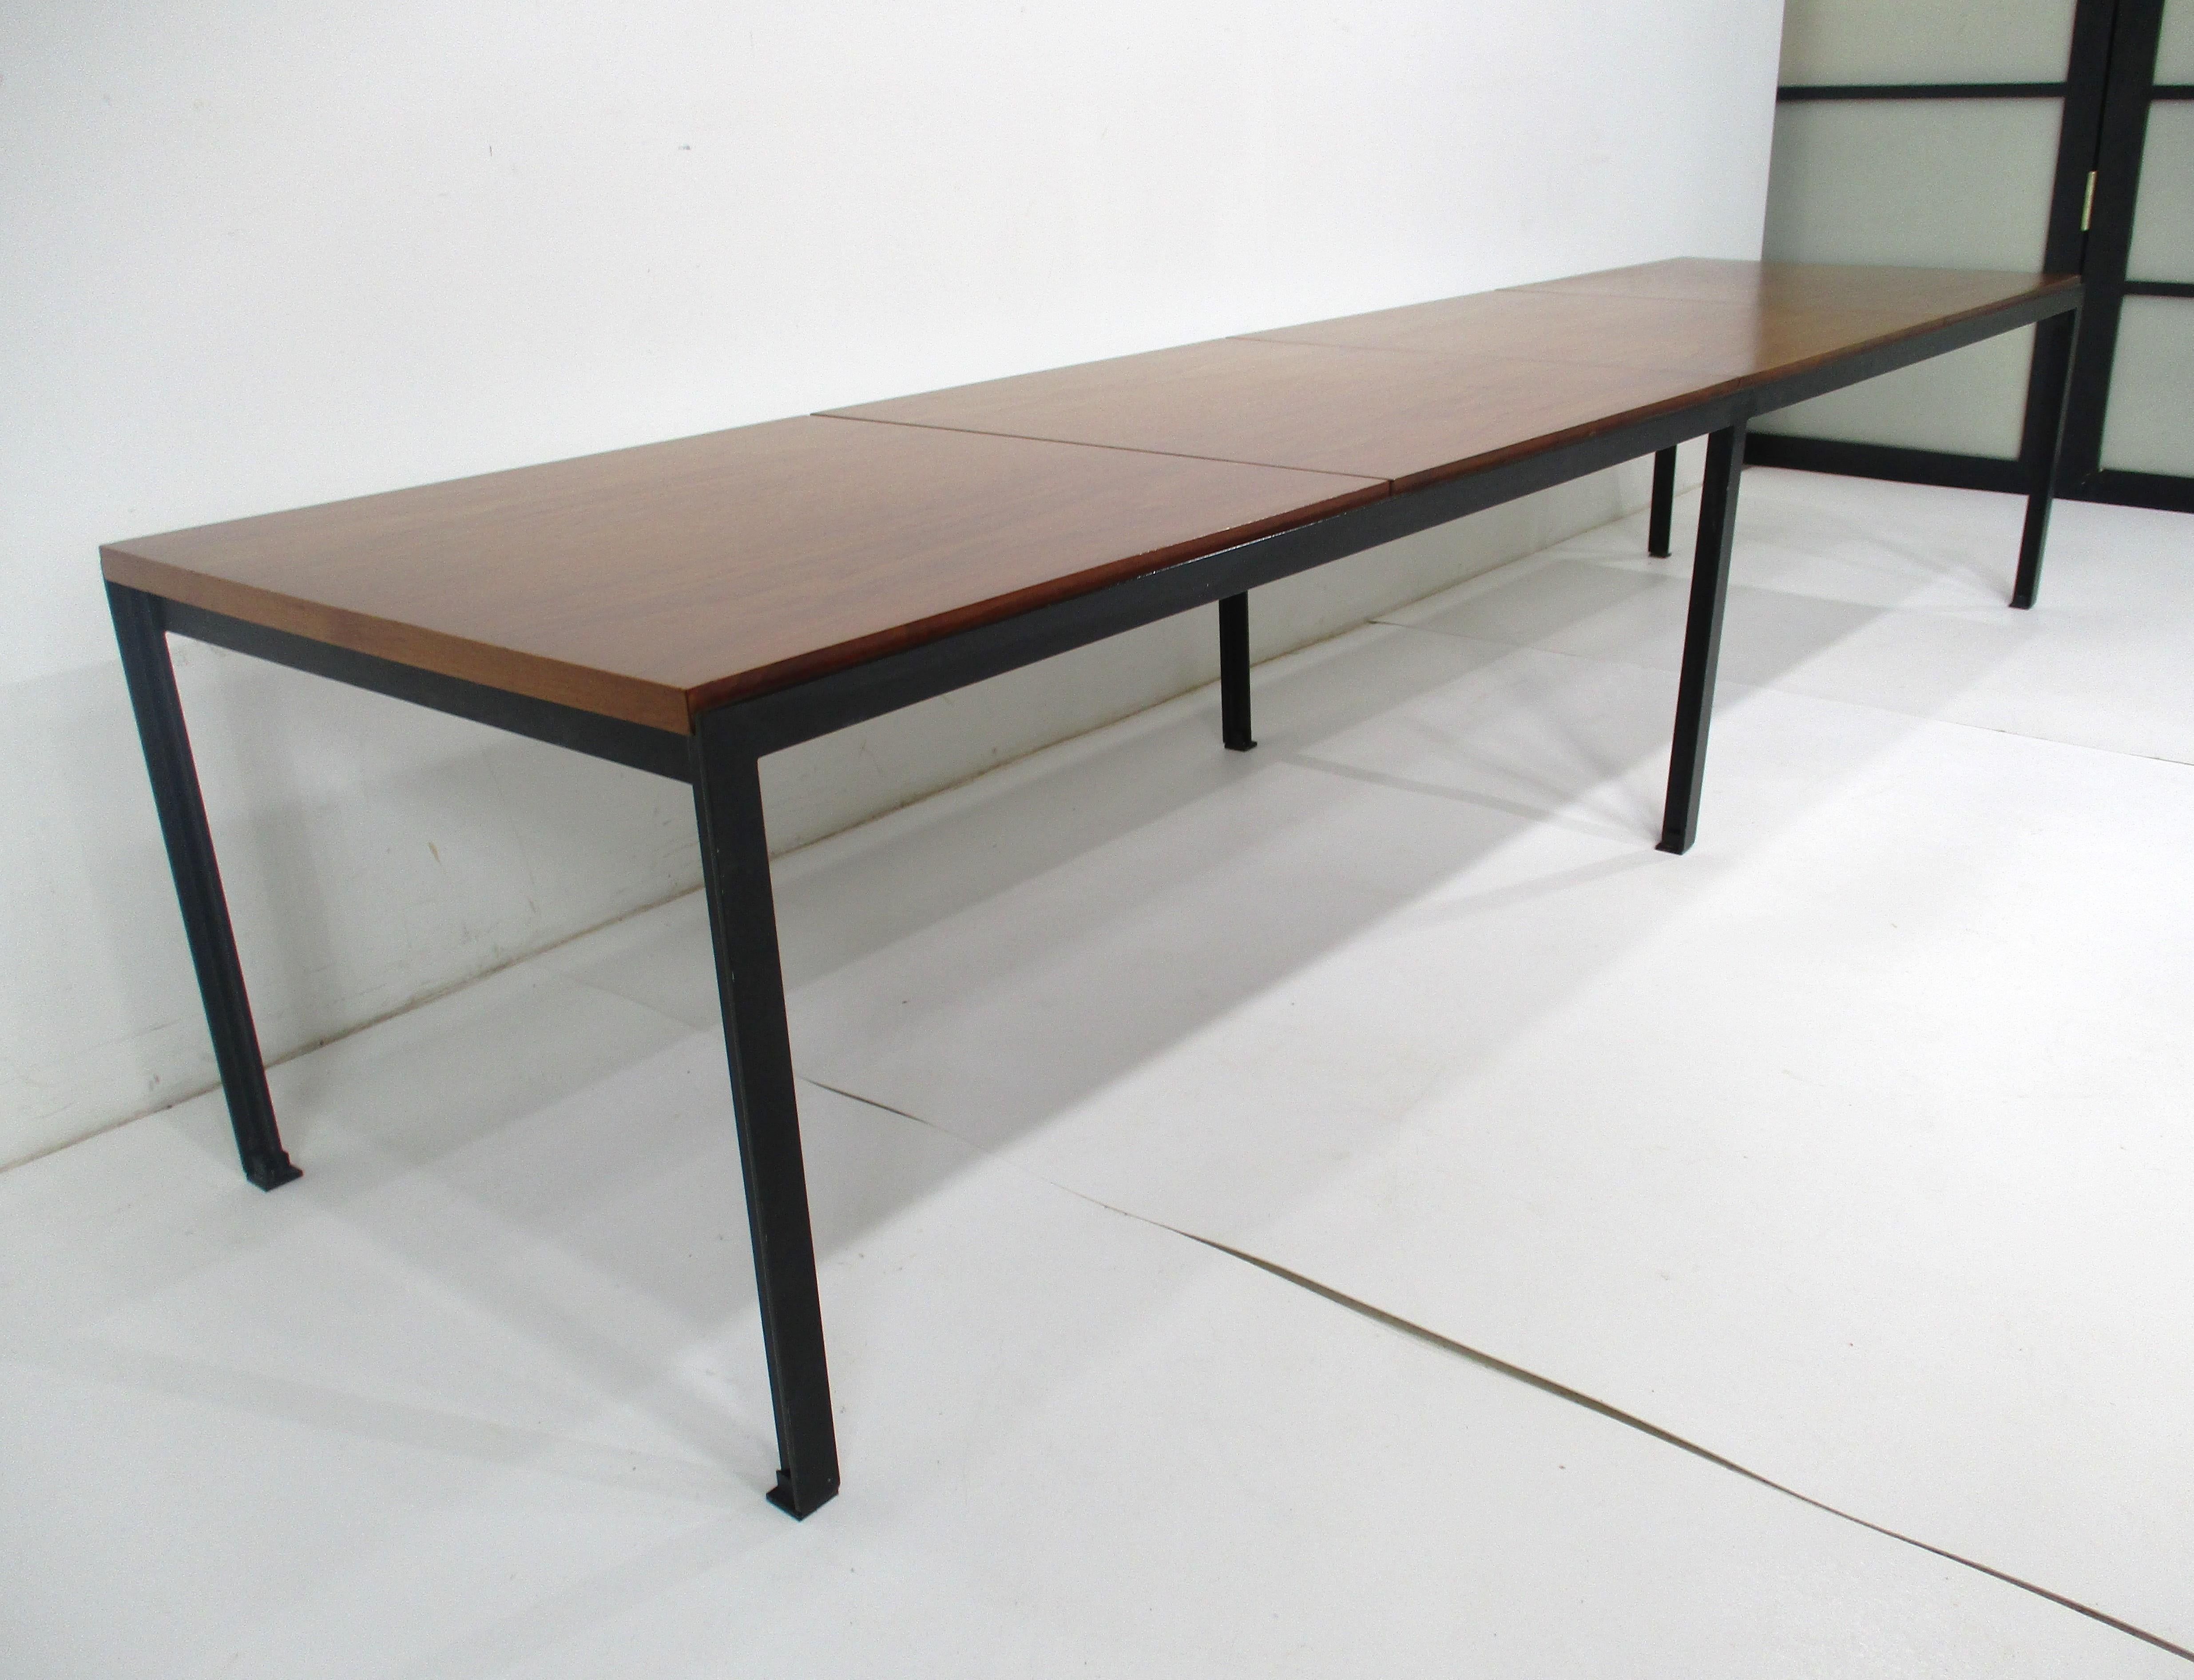 Mid-Century Modern Early T Angle Walnut Coffee Table / Bench by Florence Knoll # 332 for Knoll (A)  For Sale